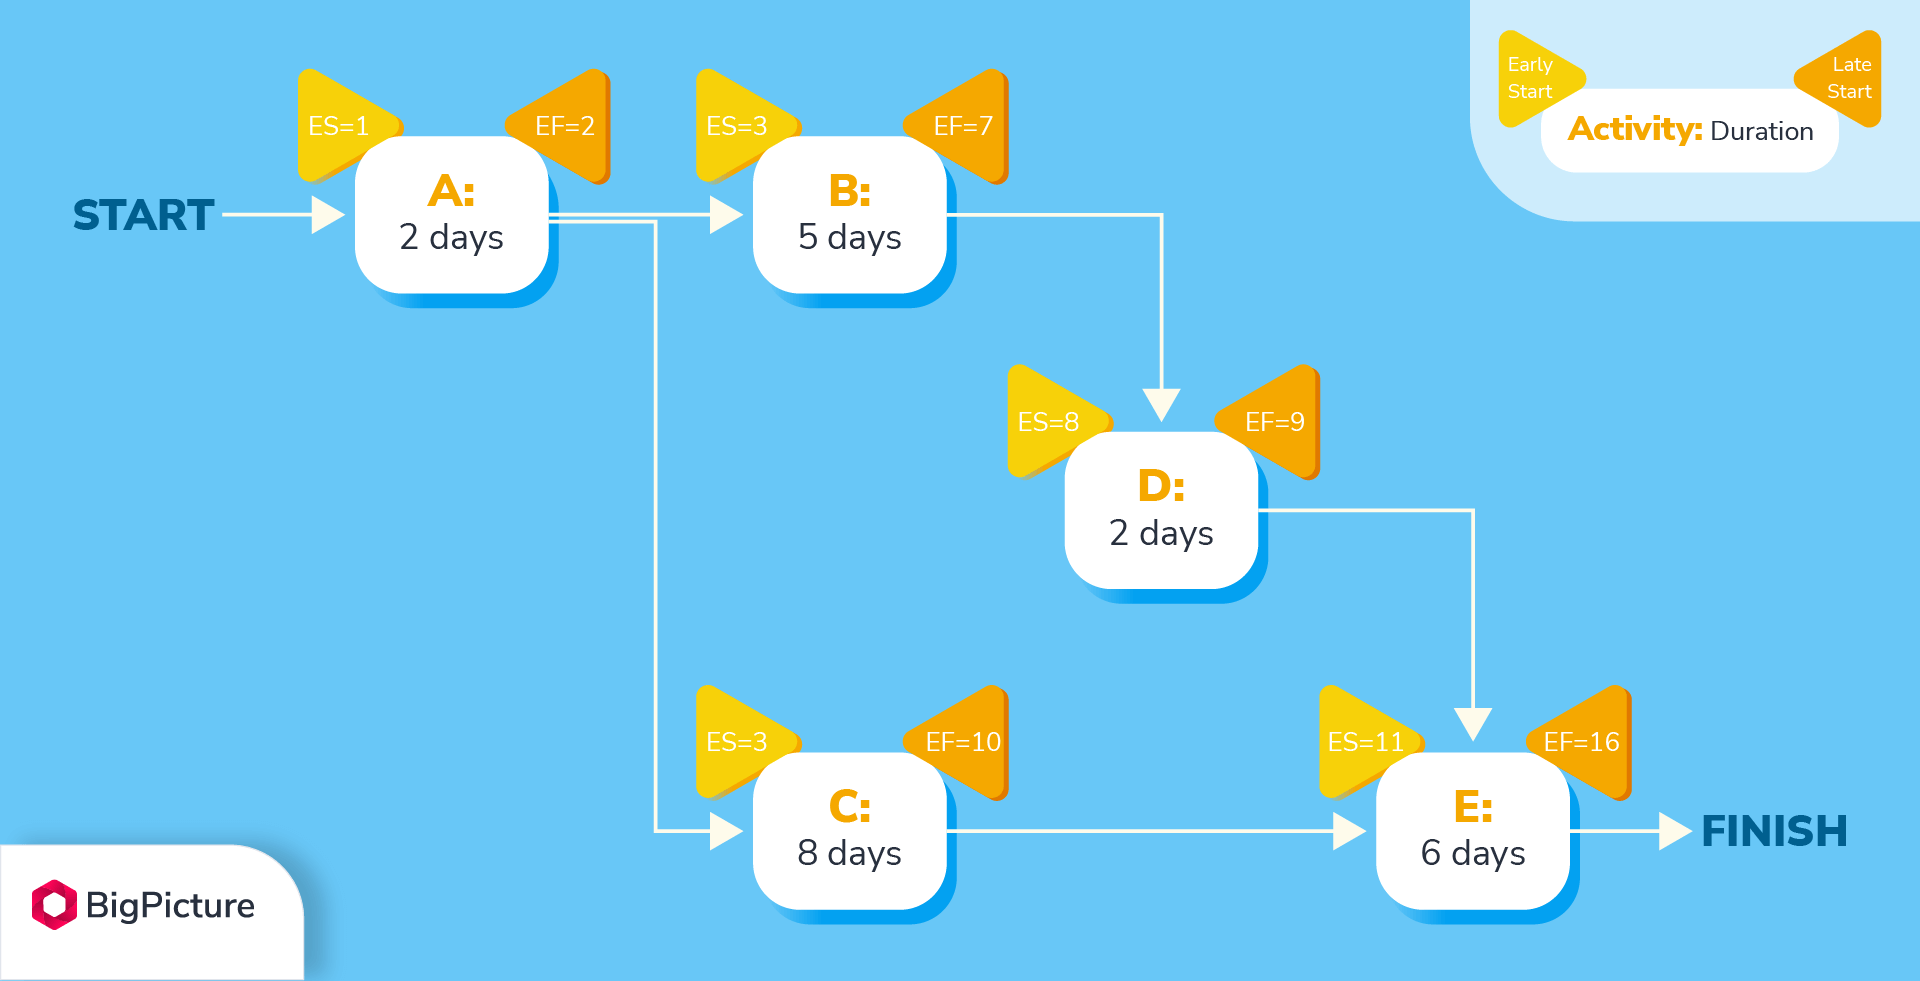 The network diagram with Early Start and Early Finish values